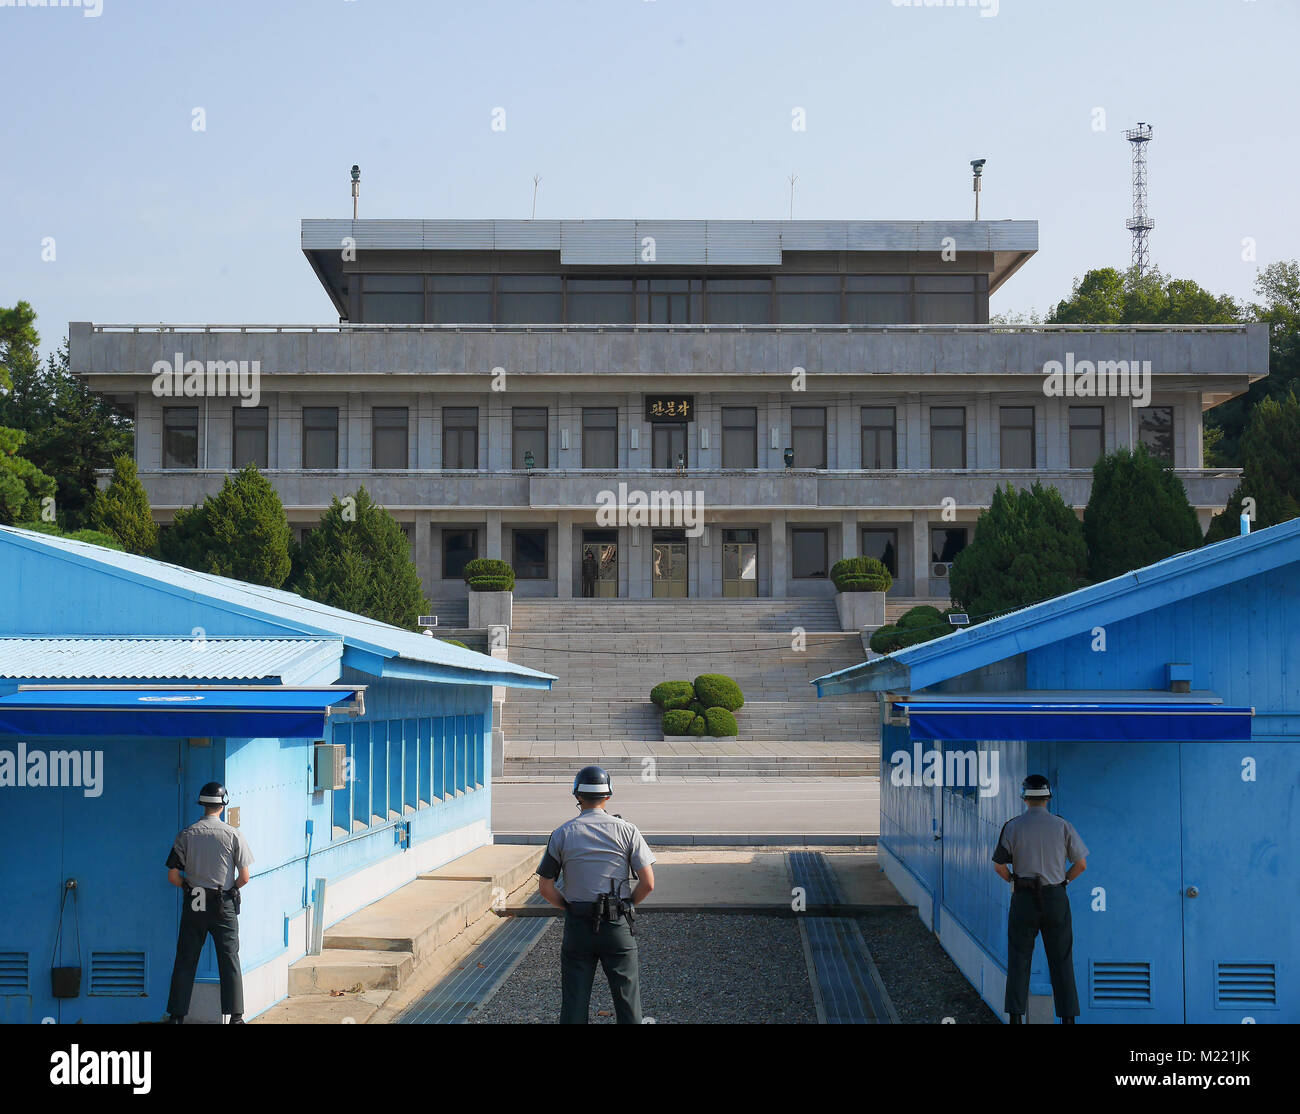 PANMUNJEON, SOUTH KOREA - SEPTEMBER 26, 2017: DMZ or DPRK demilitarized zone from South Korea facing North Korea, with South Korean soldiers looking t Stock Photo